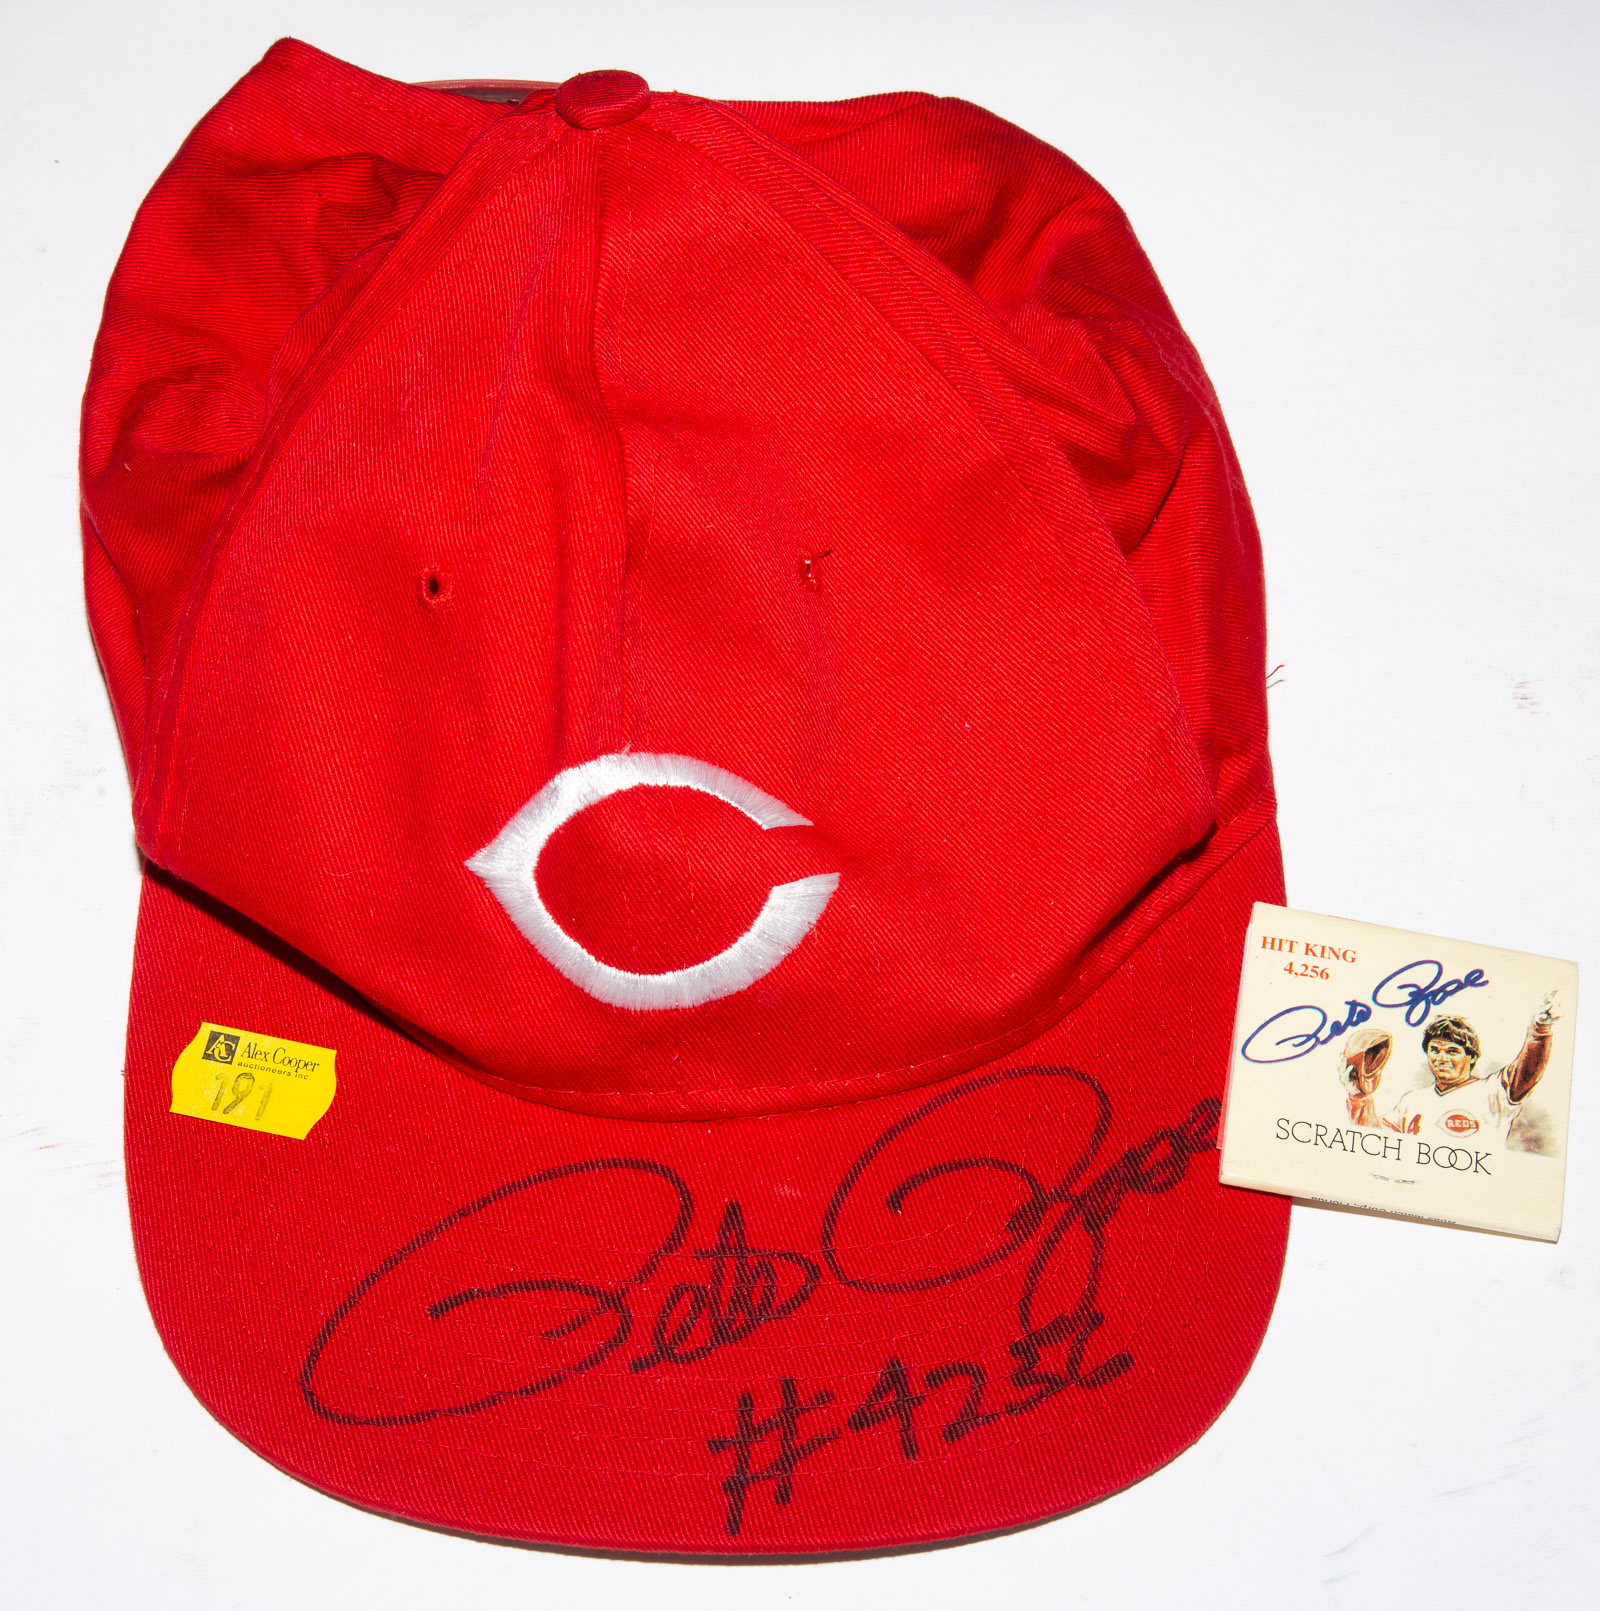 PETE ROSE SIGNED REDS CAP Signed 2898bd